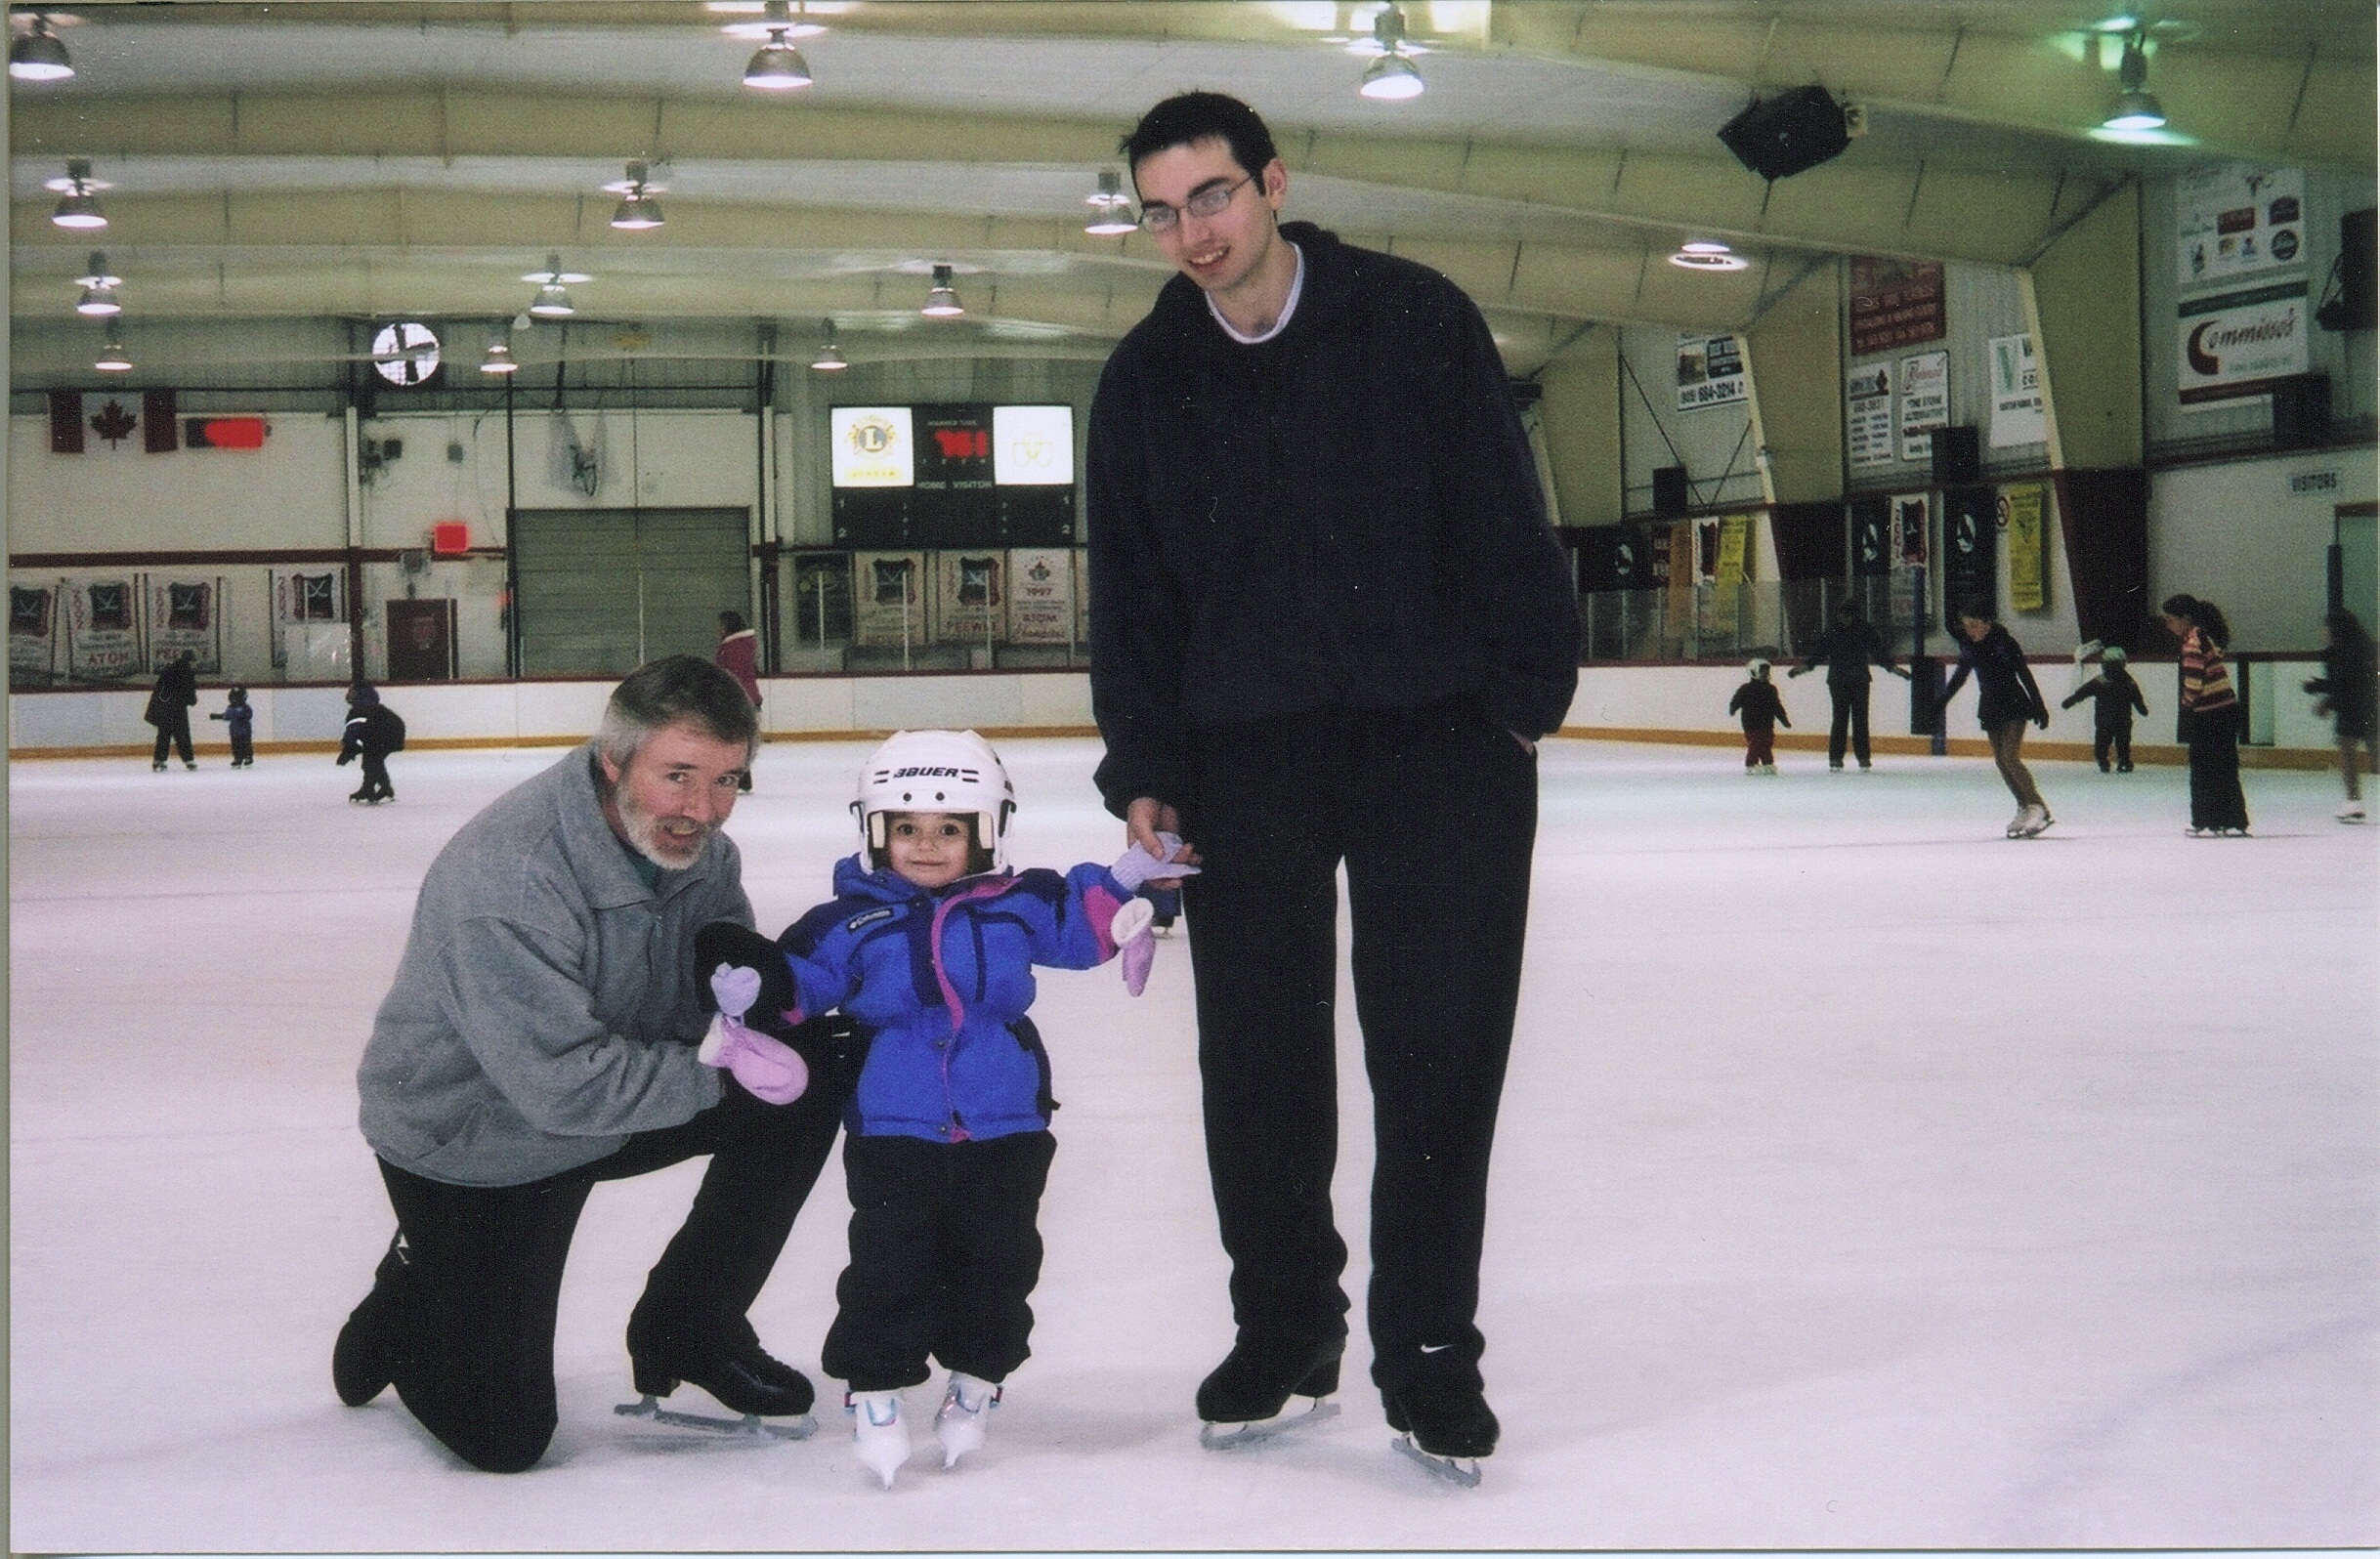 family of skaters on the ice smiling